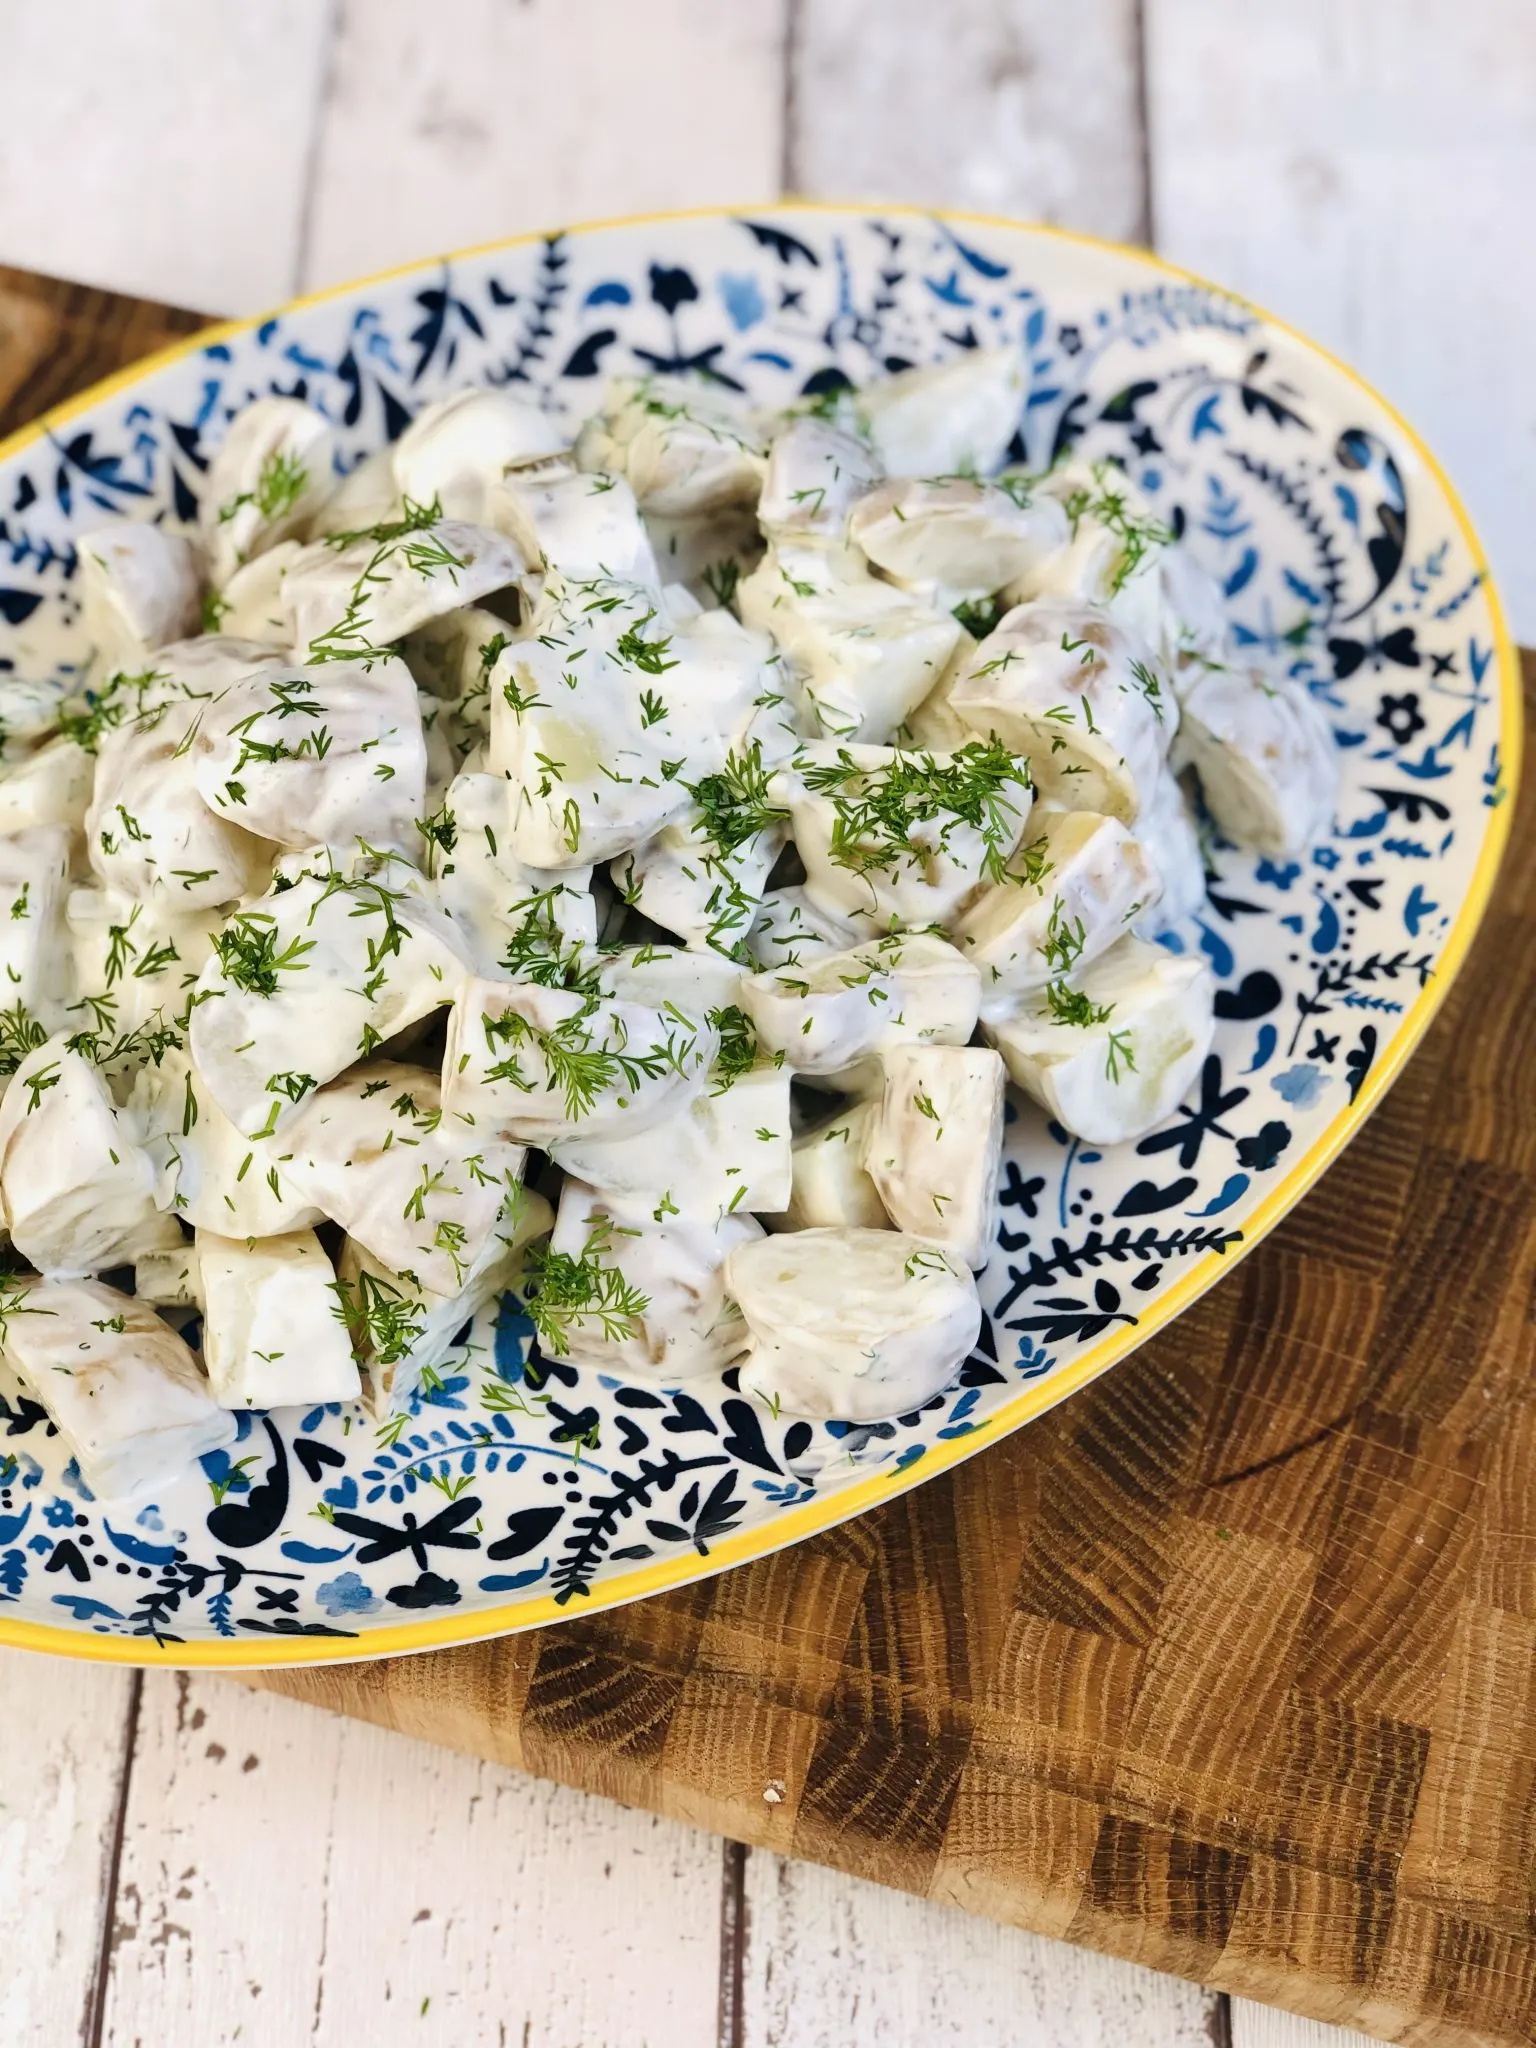 A serving dish of potato salad garnished with herbs.